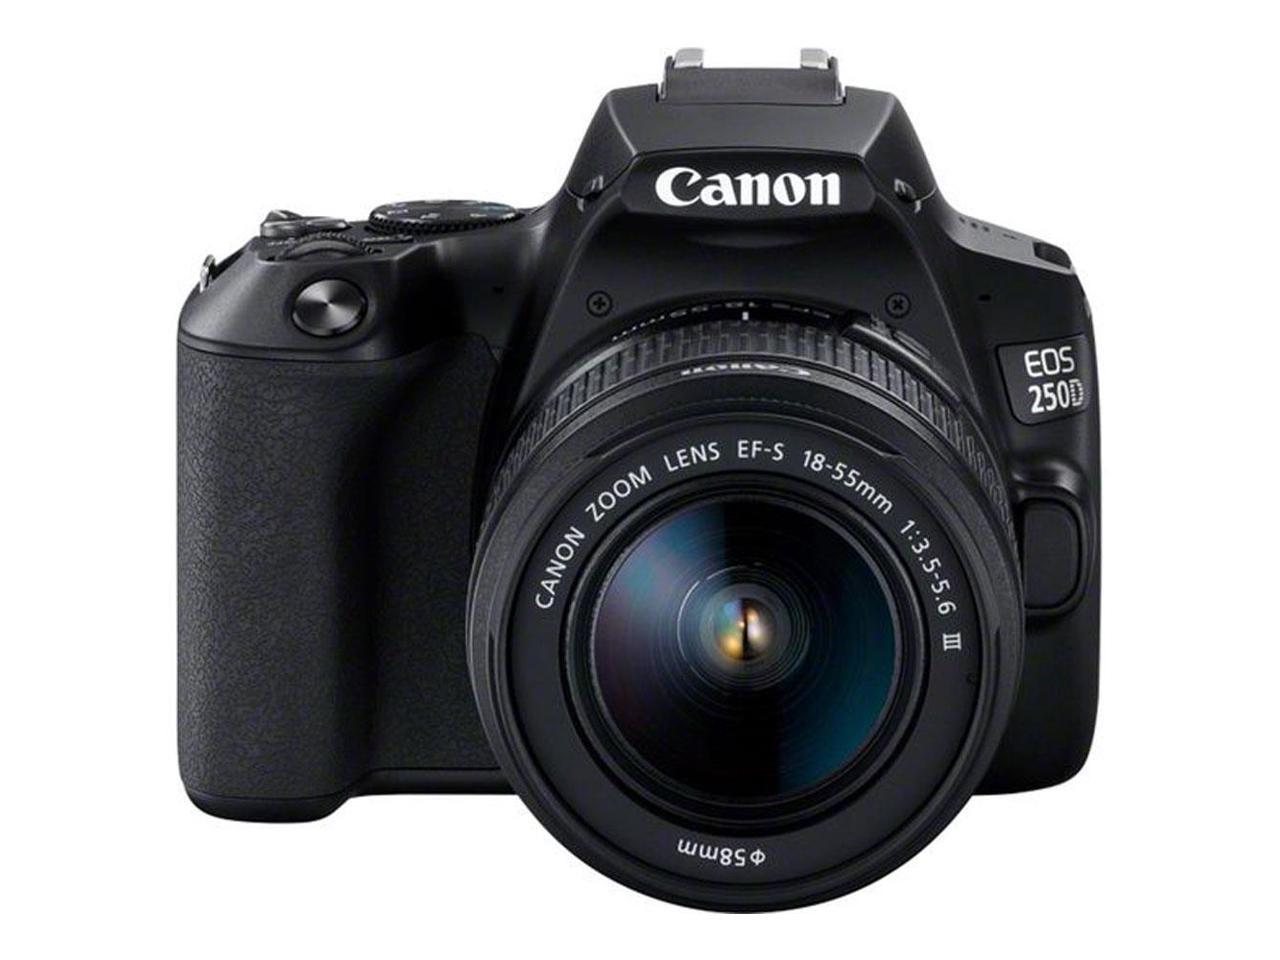 Canon EOS 250D DSLR Camera with 18-55mm Lens (Black)